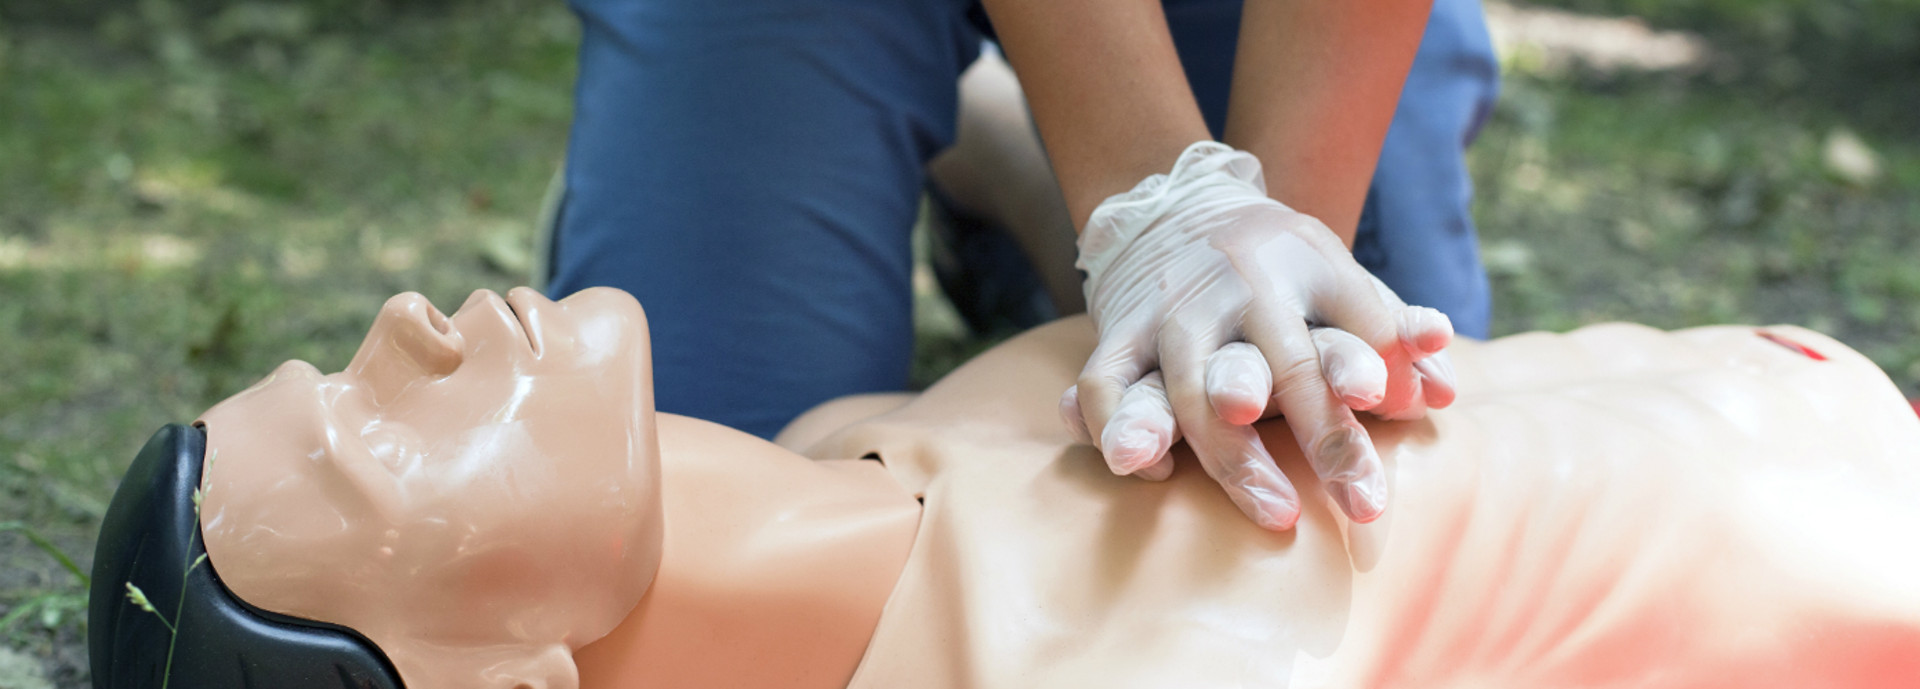 An image conveying CPR training